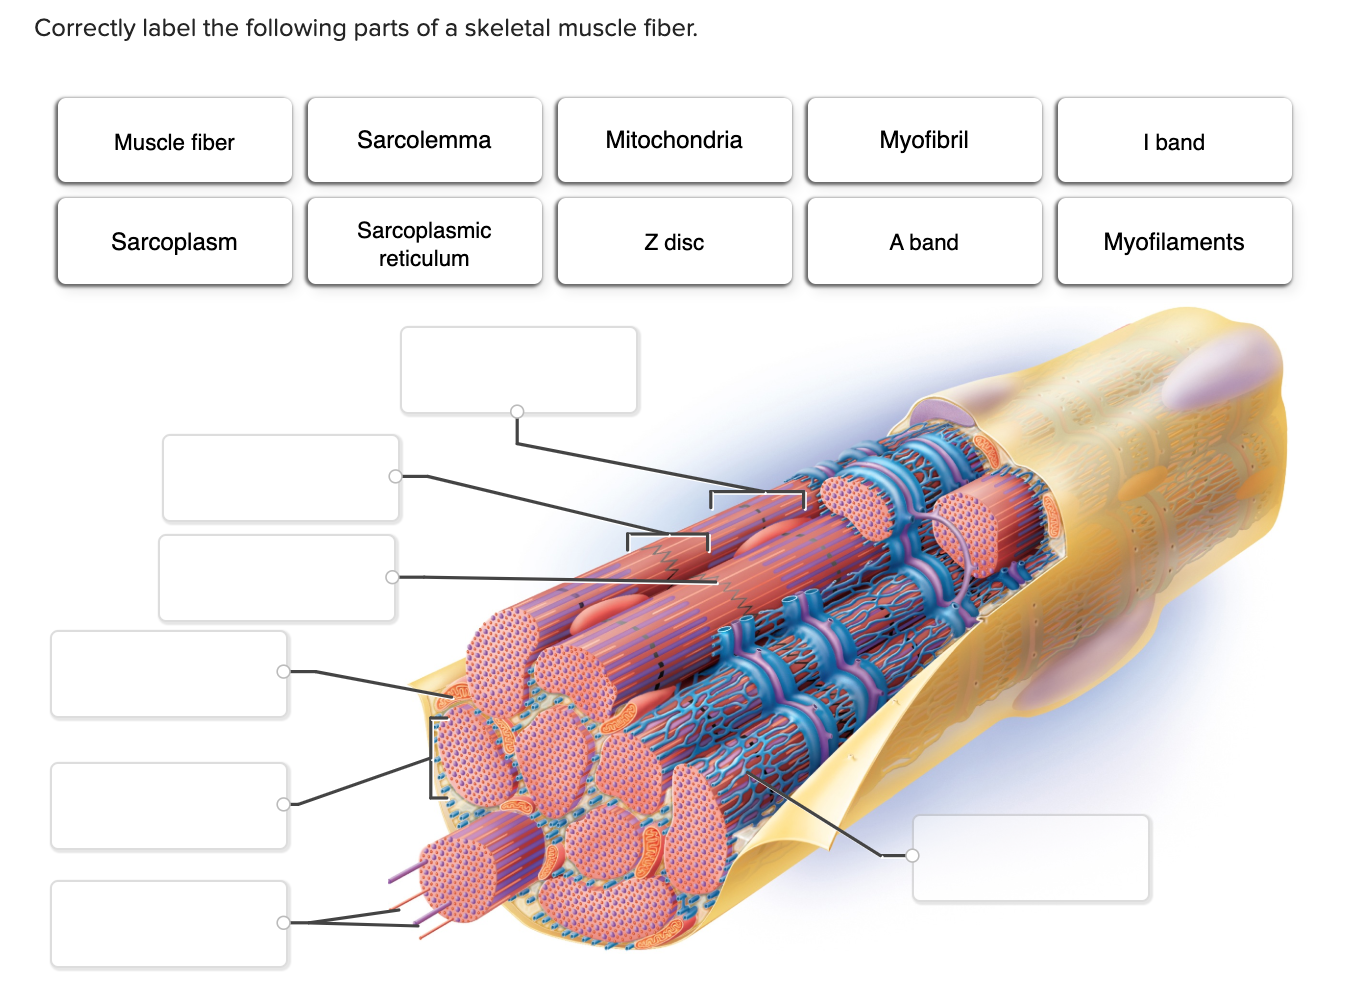 Correctly label the following parts of a skeletal muscle